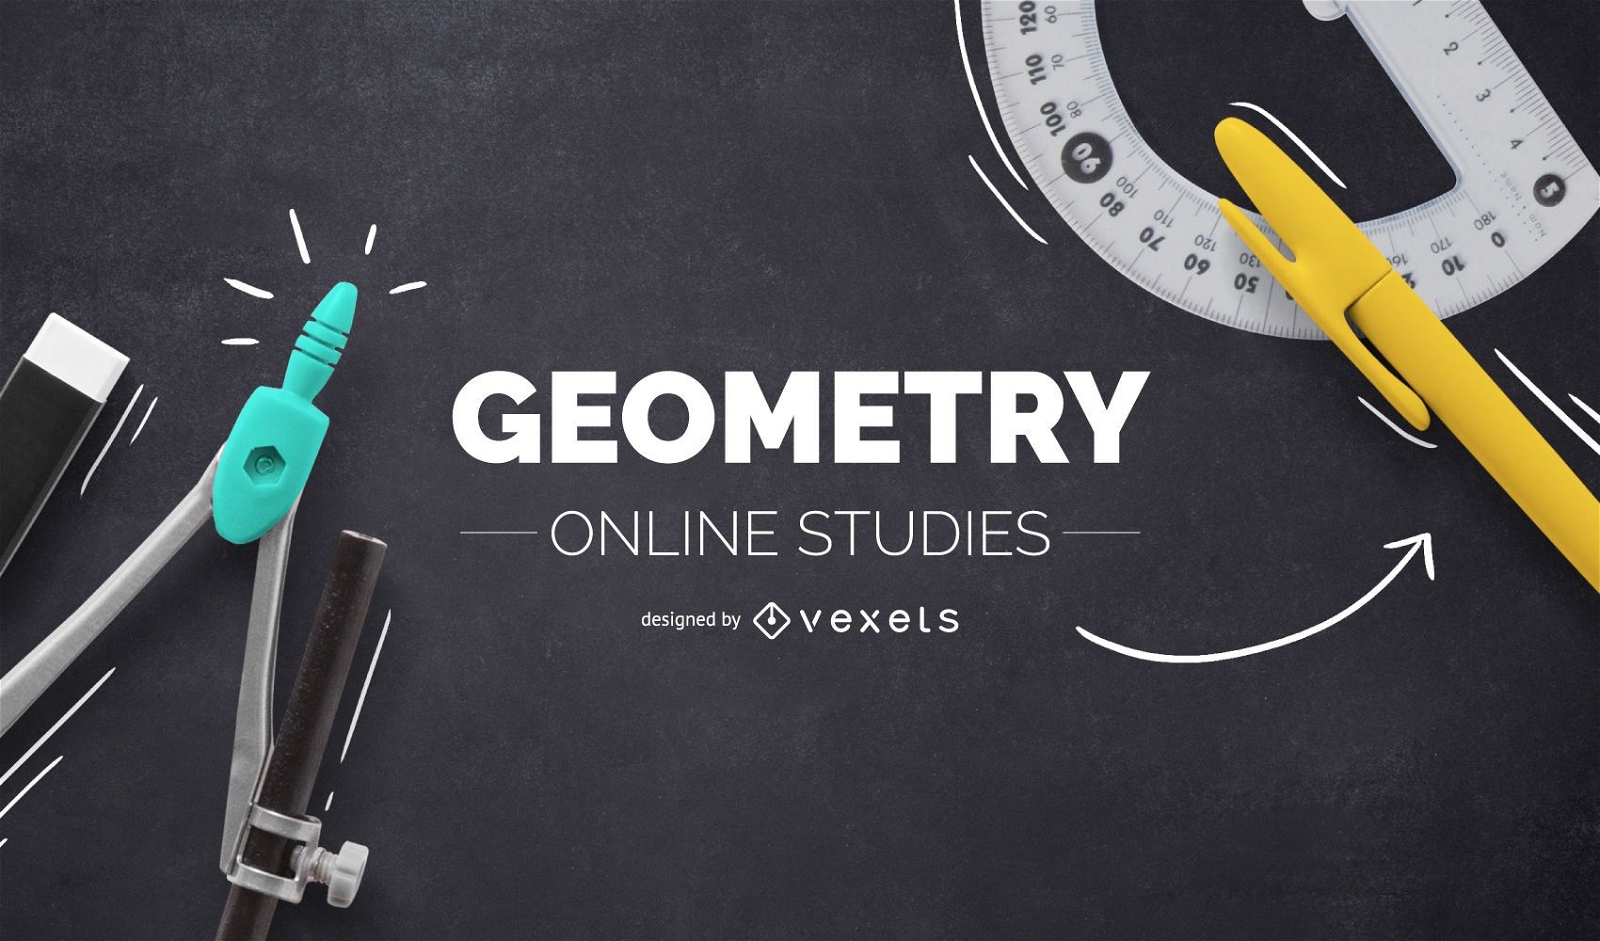 Geometry online cover design